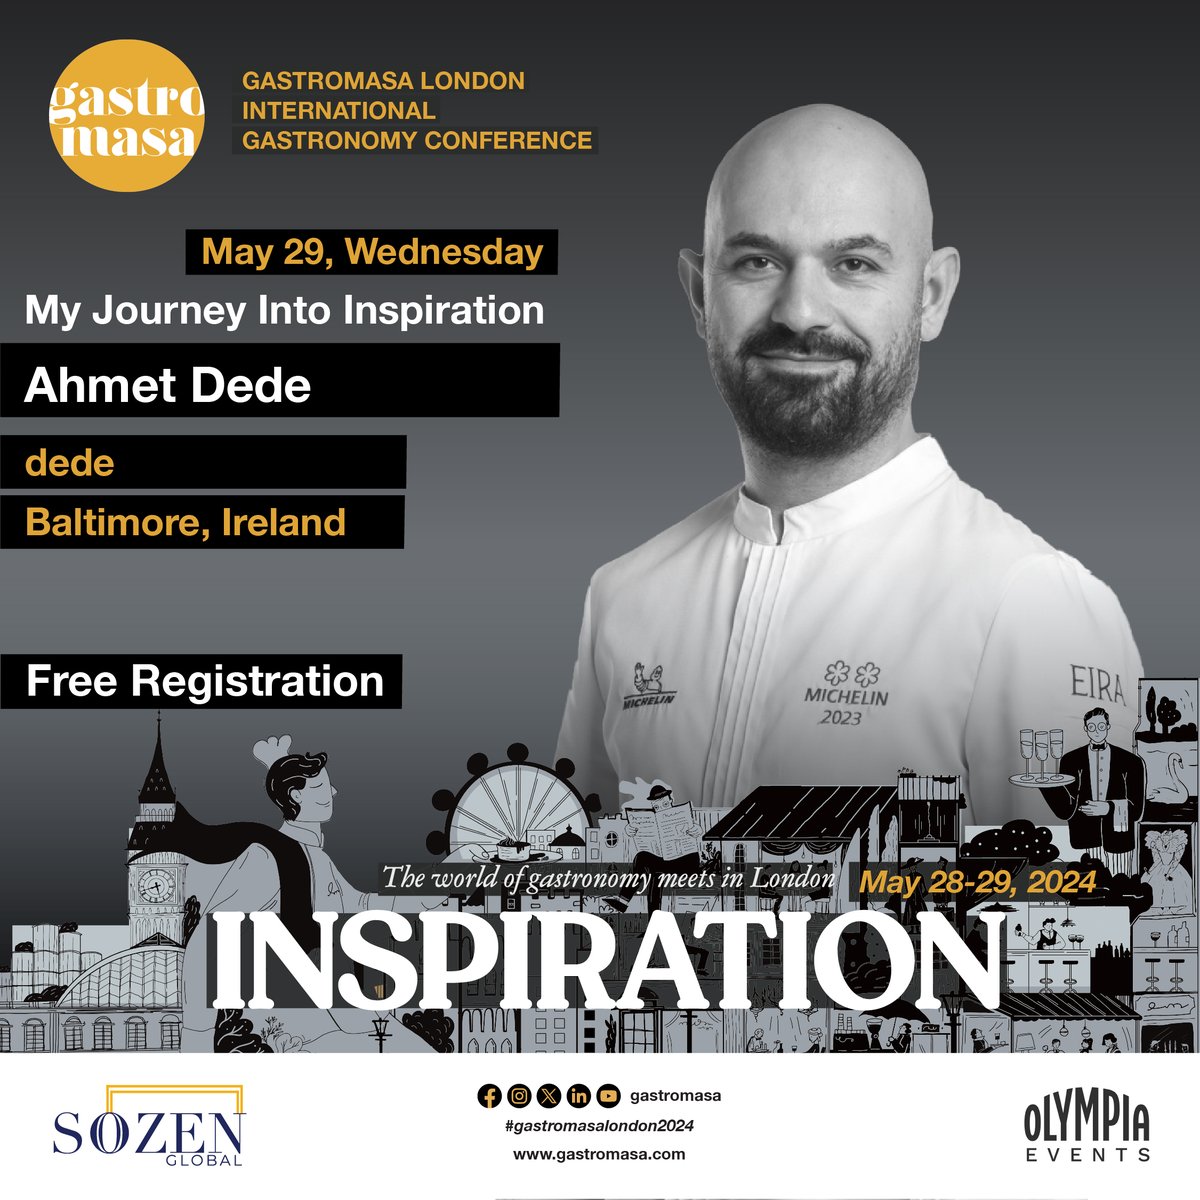 2 Michelin Starred Ahmet Dede, Founder & Executive Chef dede, is coming to Gastromasa London! Gastromasa will take place in London on 28-29 May 2024 at Olympia London with the theme of 'Inspiration'. More information and free entrance, register link: gastromasa.com/register